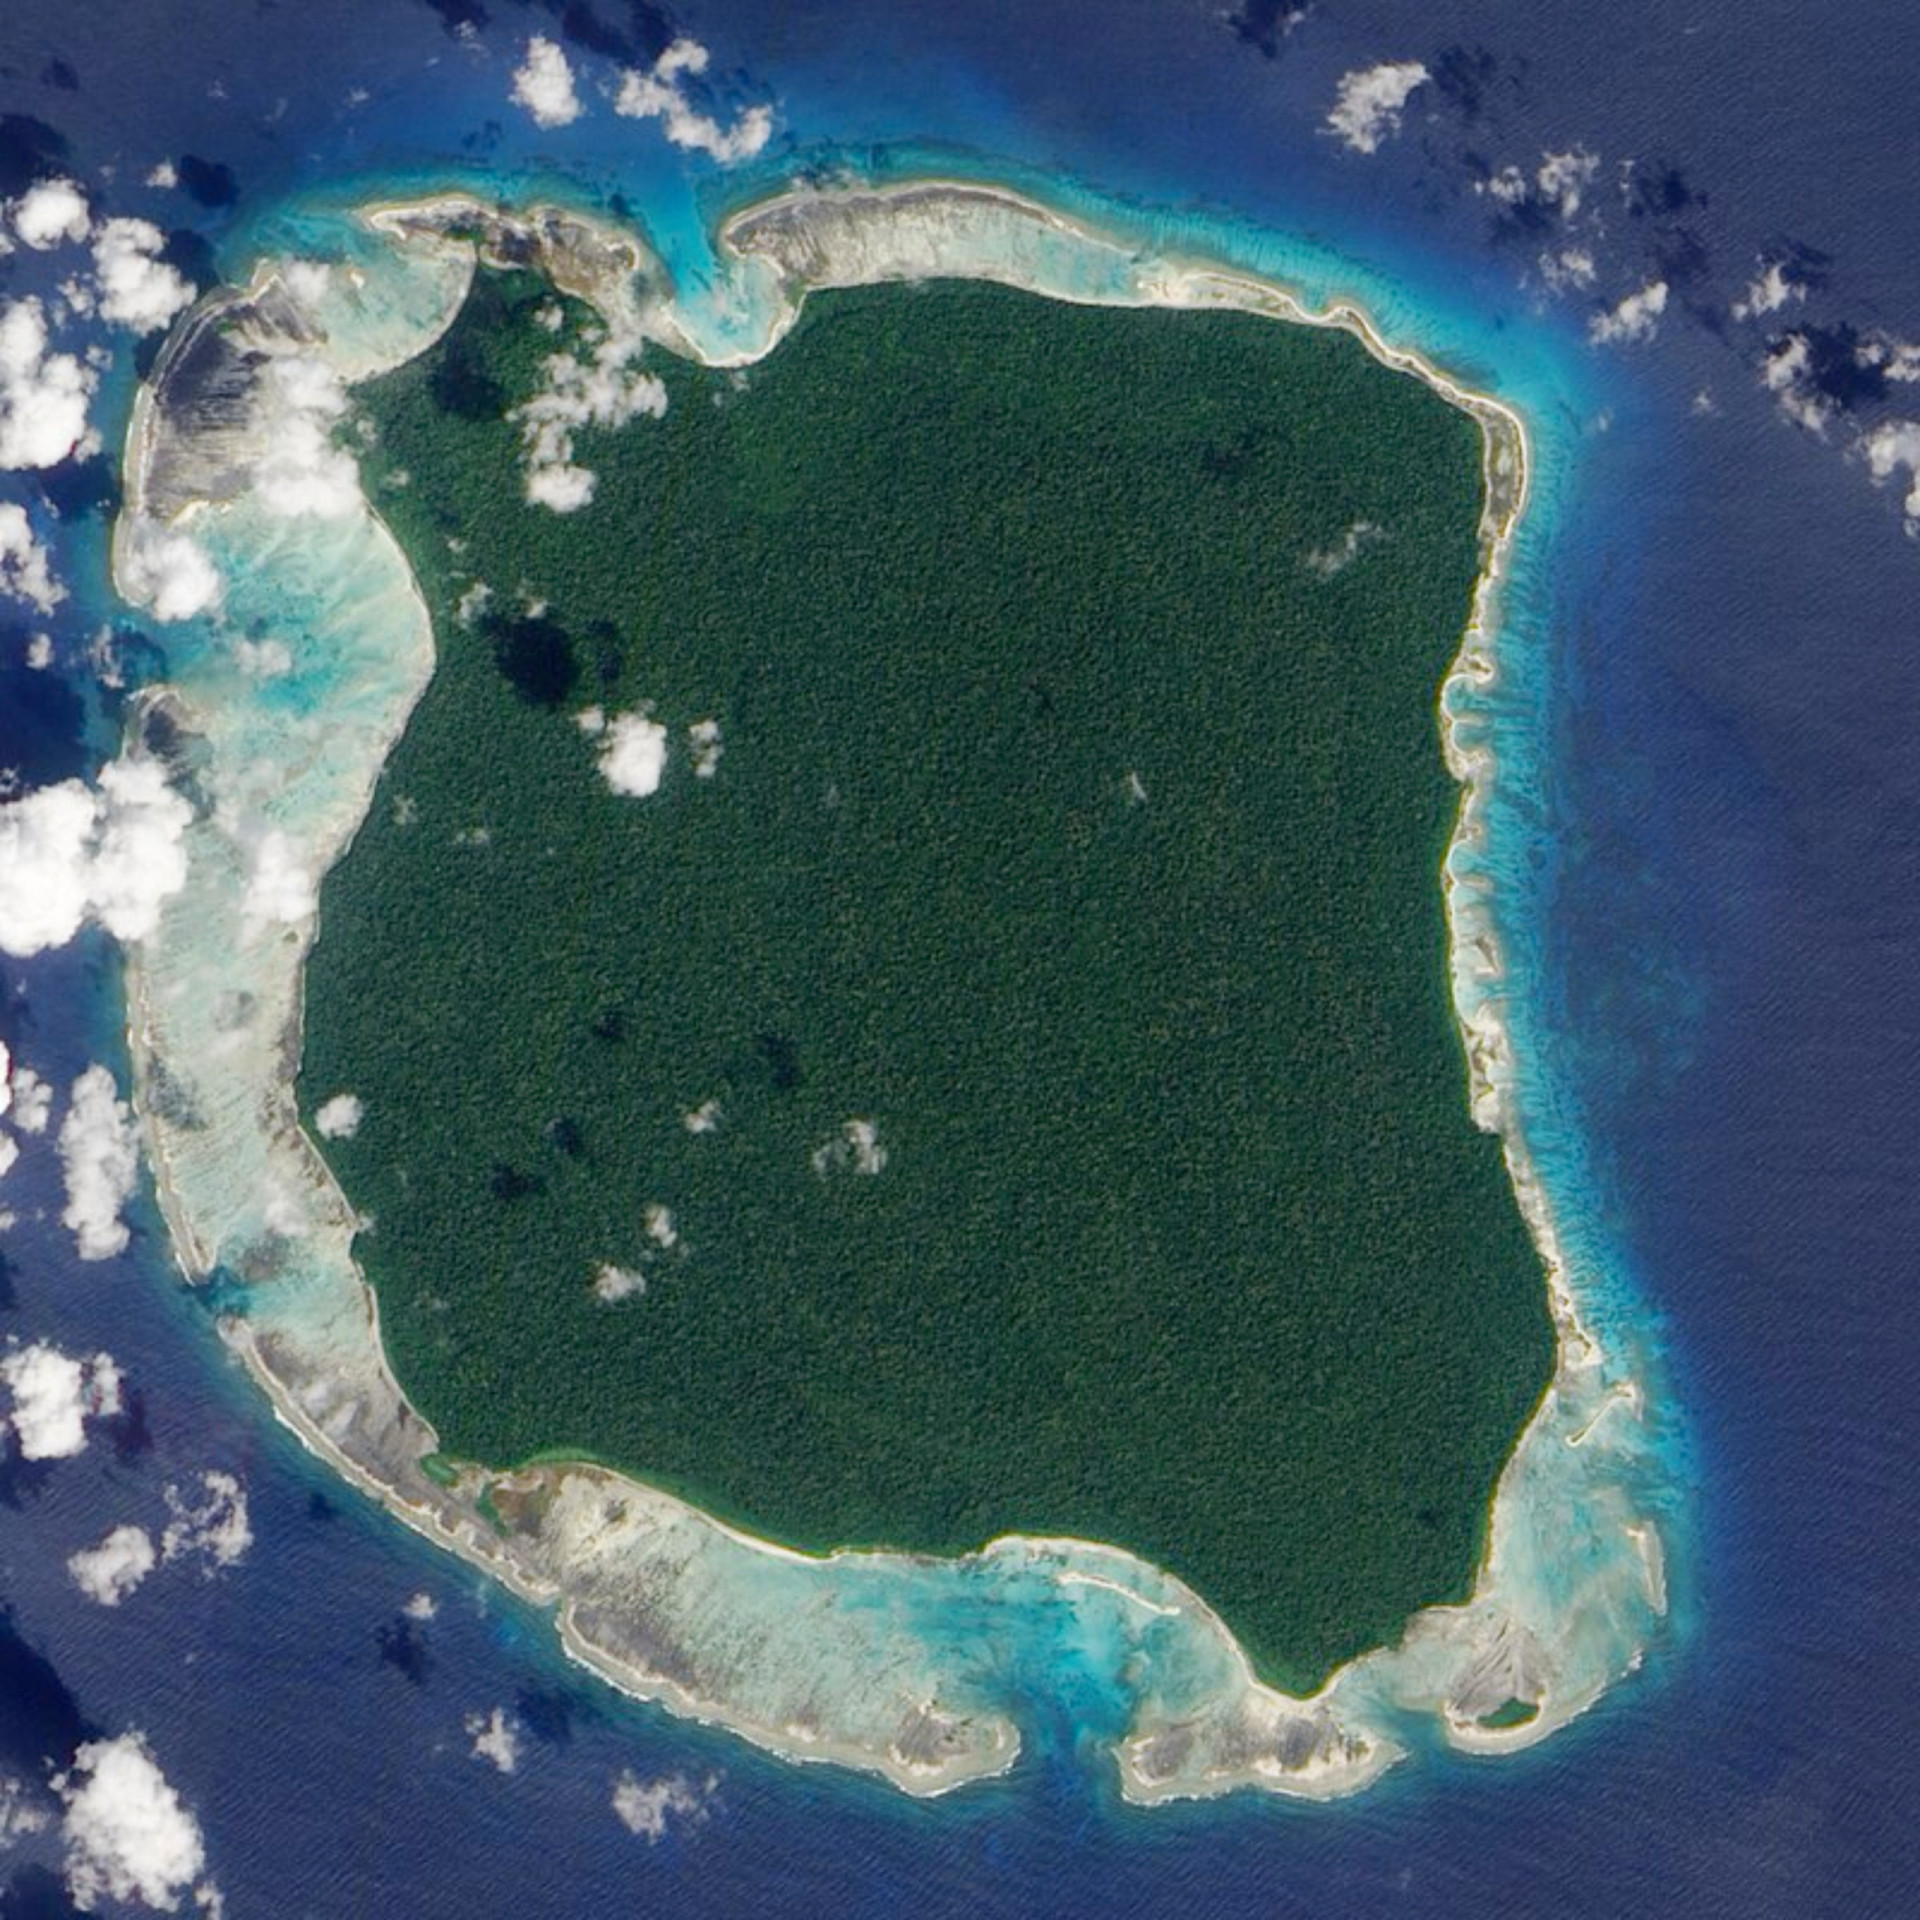 <p>North Sentinel Island is one of the Andaman Islands. It's home to the Sentinelese, an isolated indigenous people fiercely protective of their island refuge. In fact, they are hostile to outsiders and have killed people who approached or landed on the island. In 2018, an American tourist was murdered while attempting to make contact with the community.</p><p>You may also like:<a href="https://www.starsinsider.com/n/221969?utm_source=msn.com&utm_medium=display&utm_campaign=referral_description&utm_content=689154en-my"> MH370: new revelation in the case of the airplane that was never found!</a></p>